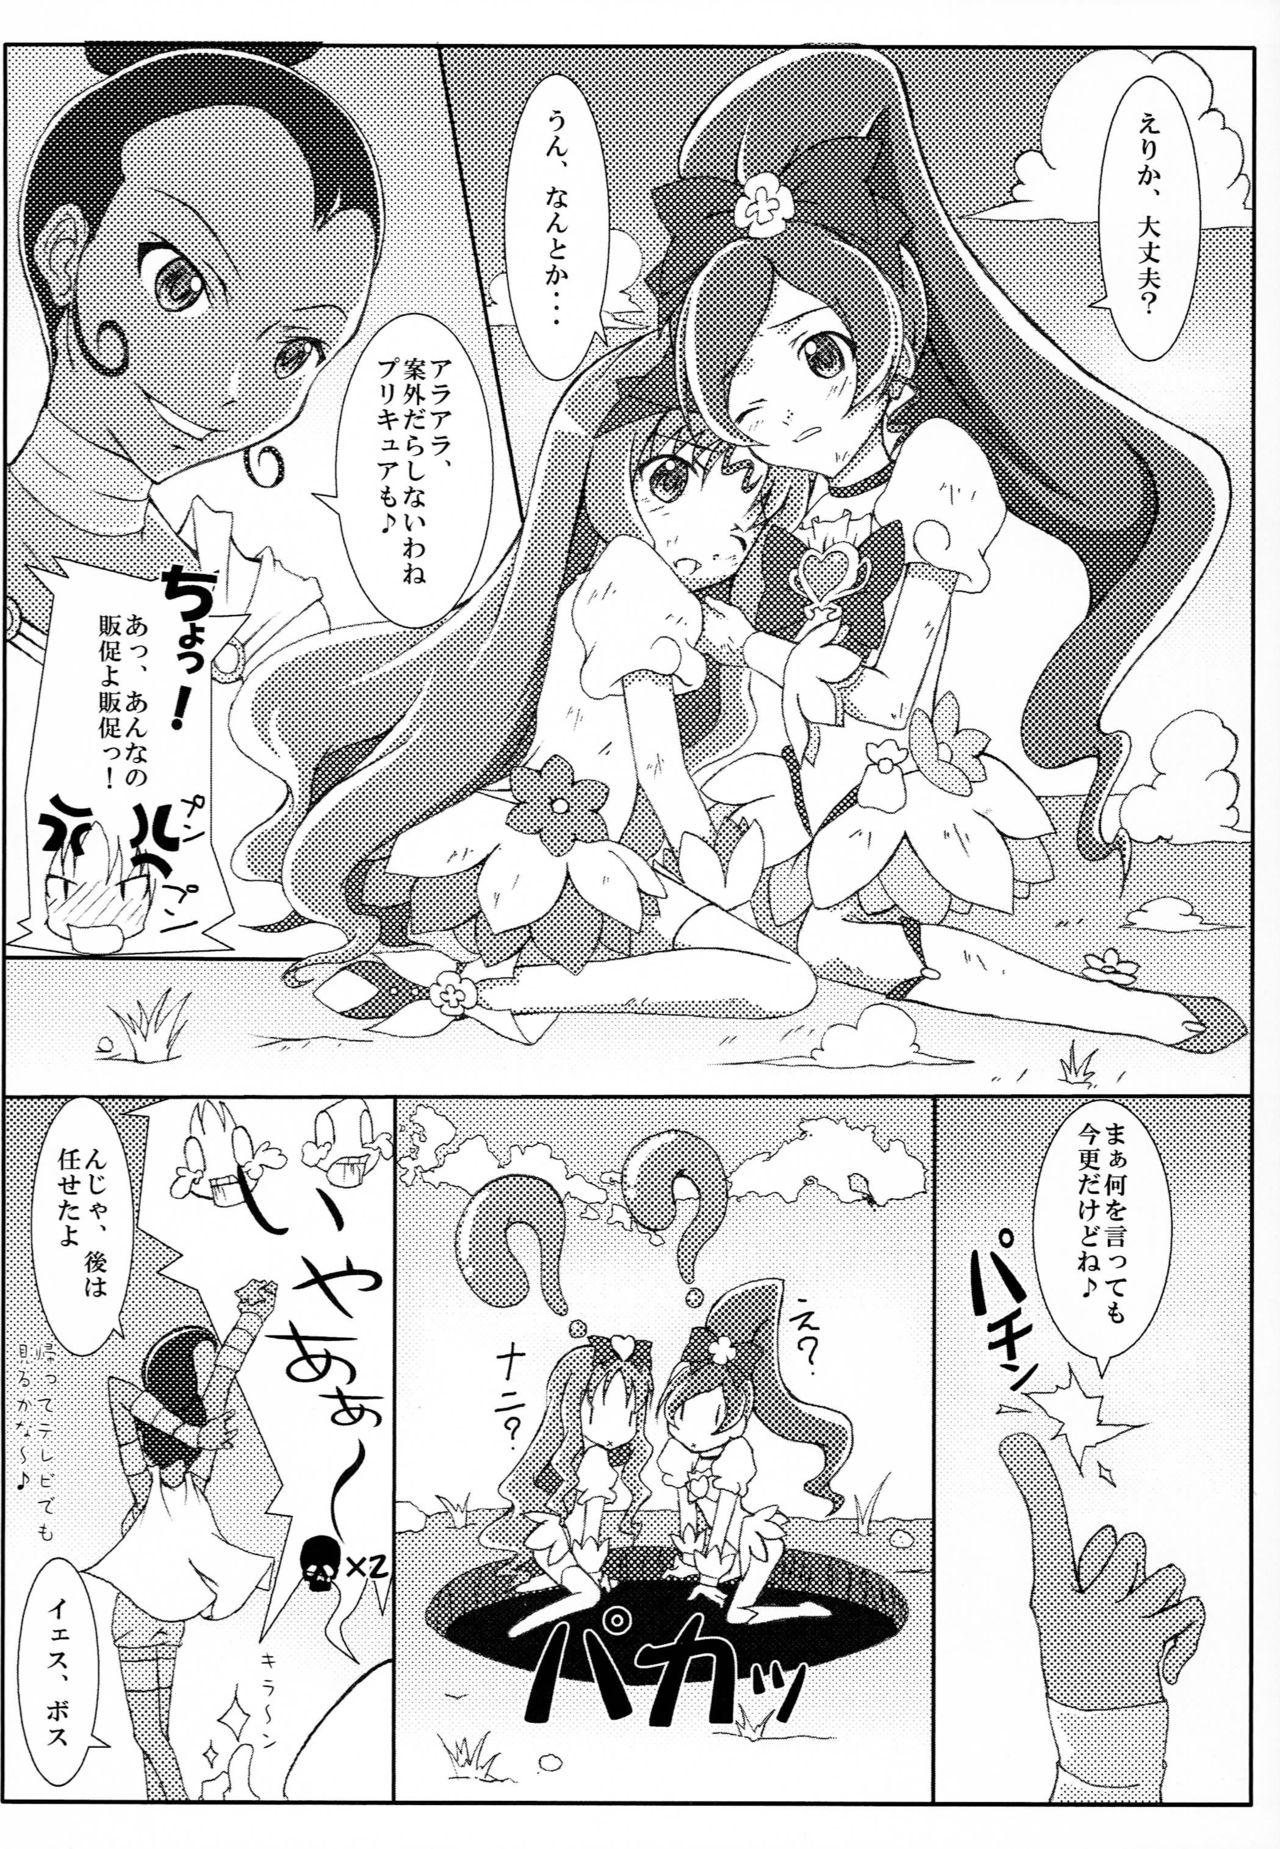 Hot Brunette Misfortunes never come singly - Heartcatch precure Hot Wife - Page 3